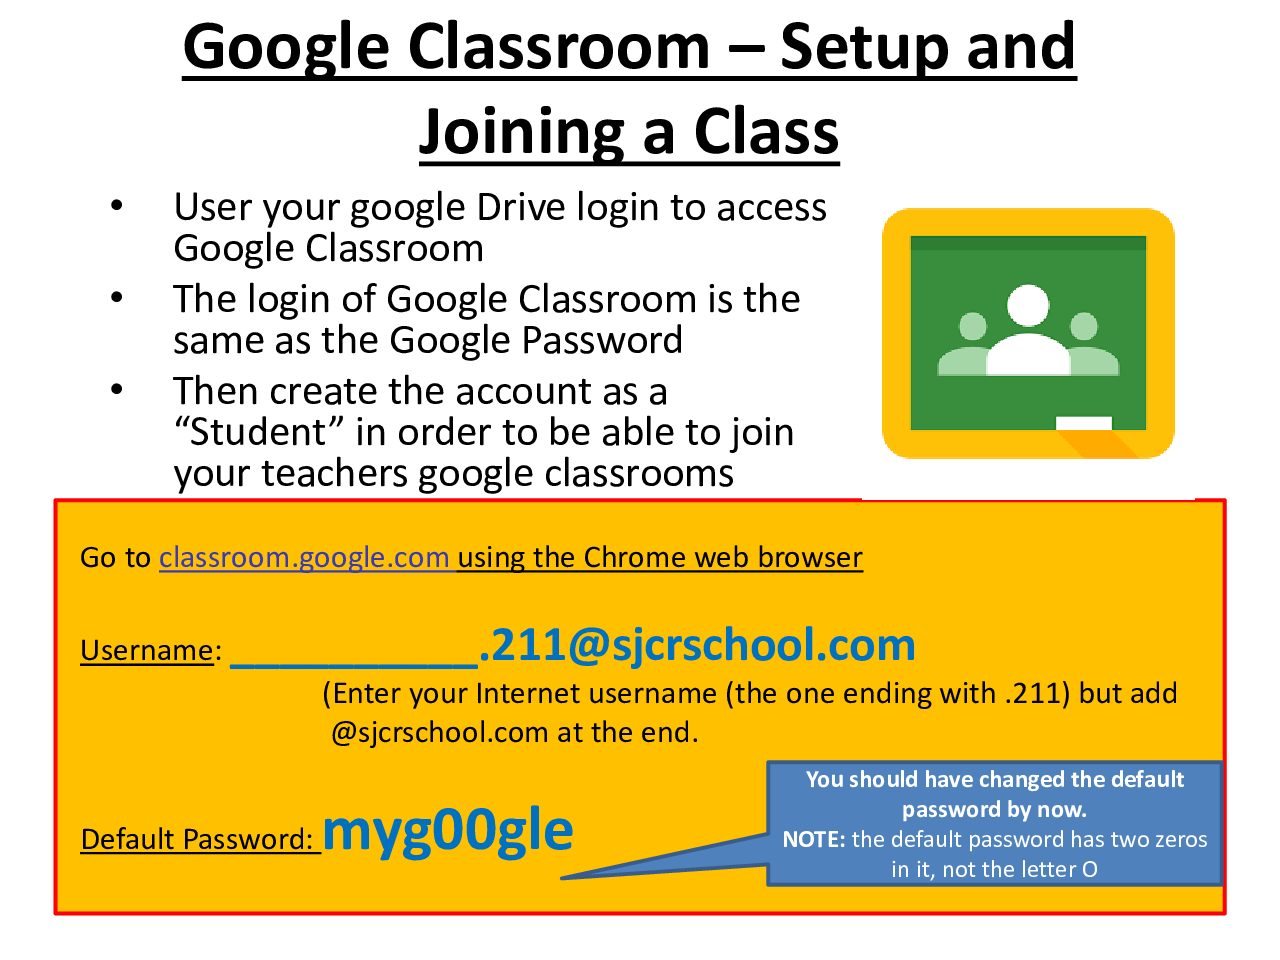 How to Log-In Google Classroom as a Student 